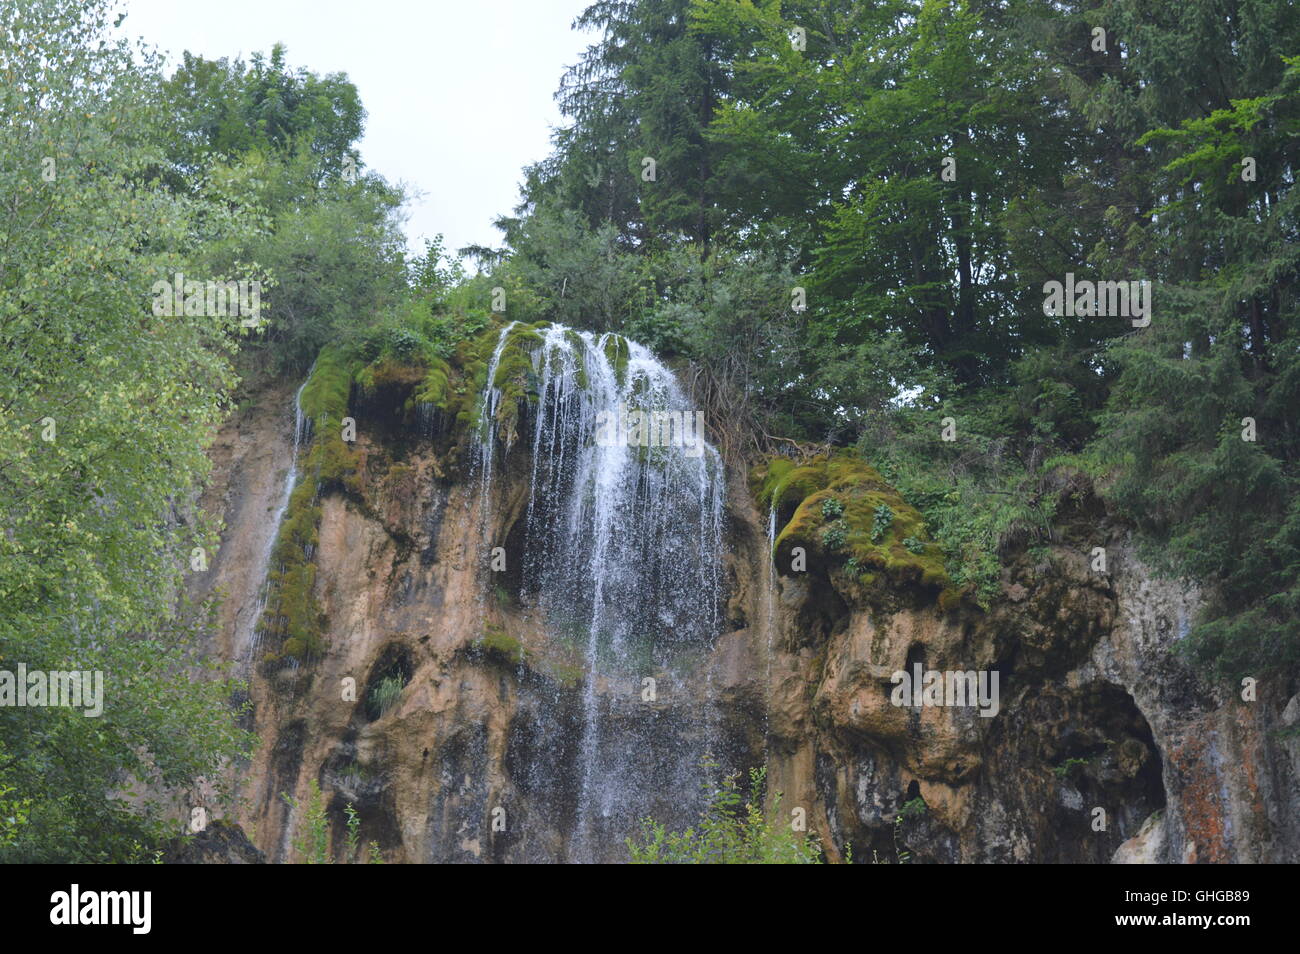 Waterfall in a forest Stock Photo